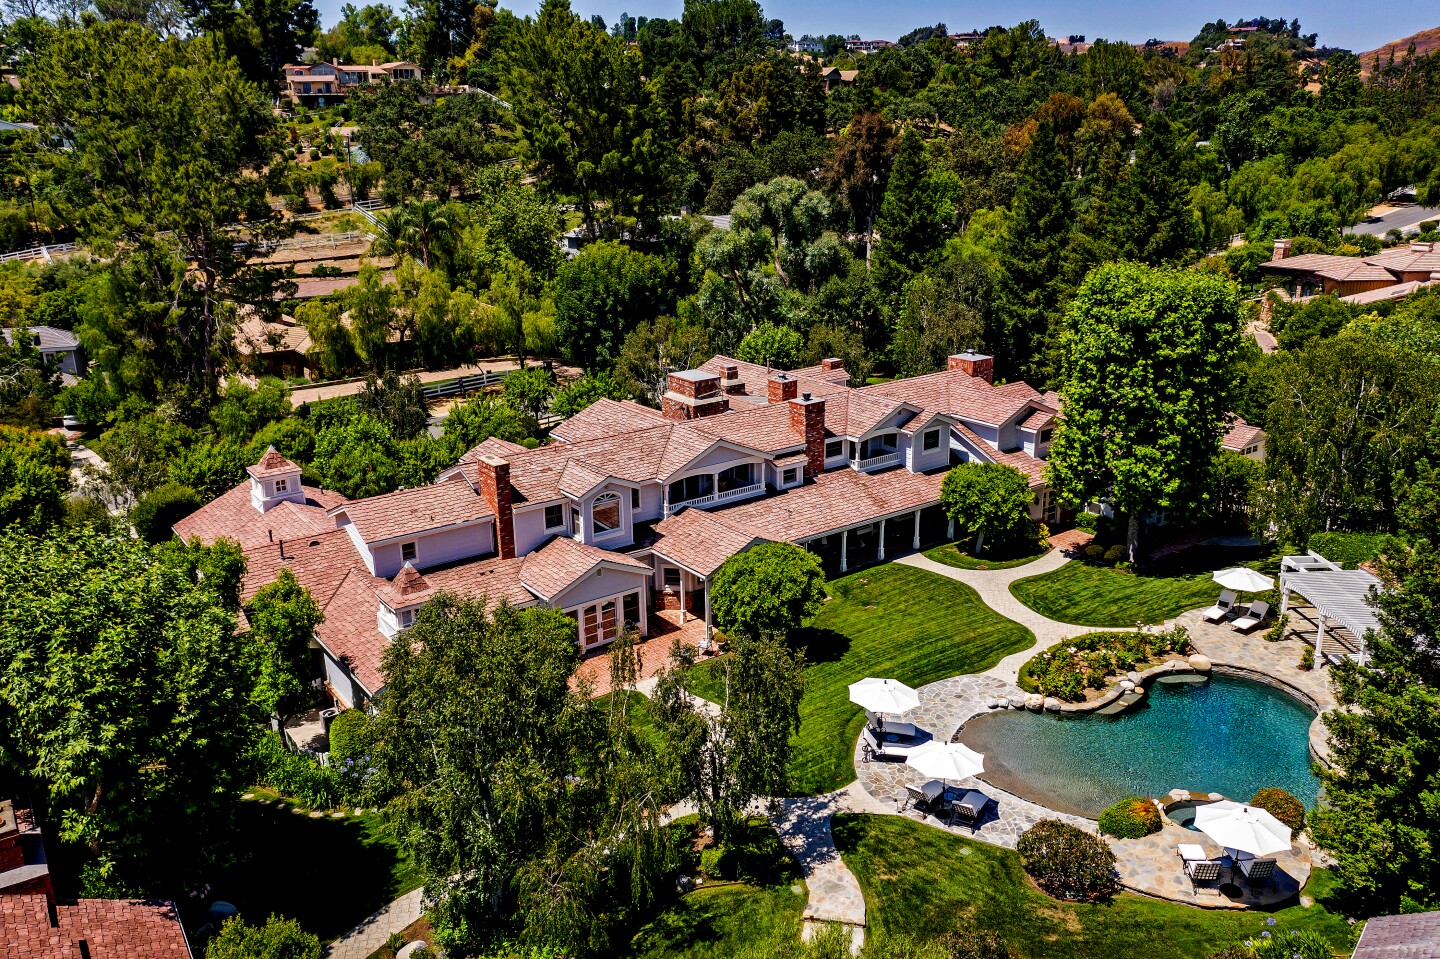 HIGH $27.5 million The 2.6-acre spread includes two homes that combines for 21,000 square feet, a backyard with a pool and horse facilities, and a sports facility with a gym, racquetball court, batting cage, tanning room and 150-person party room.